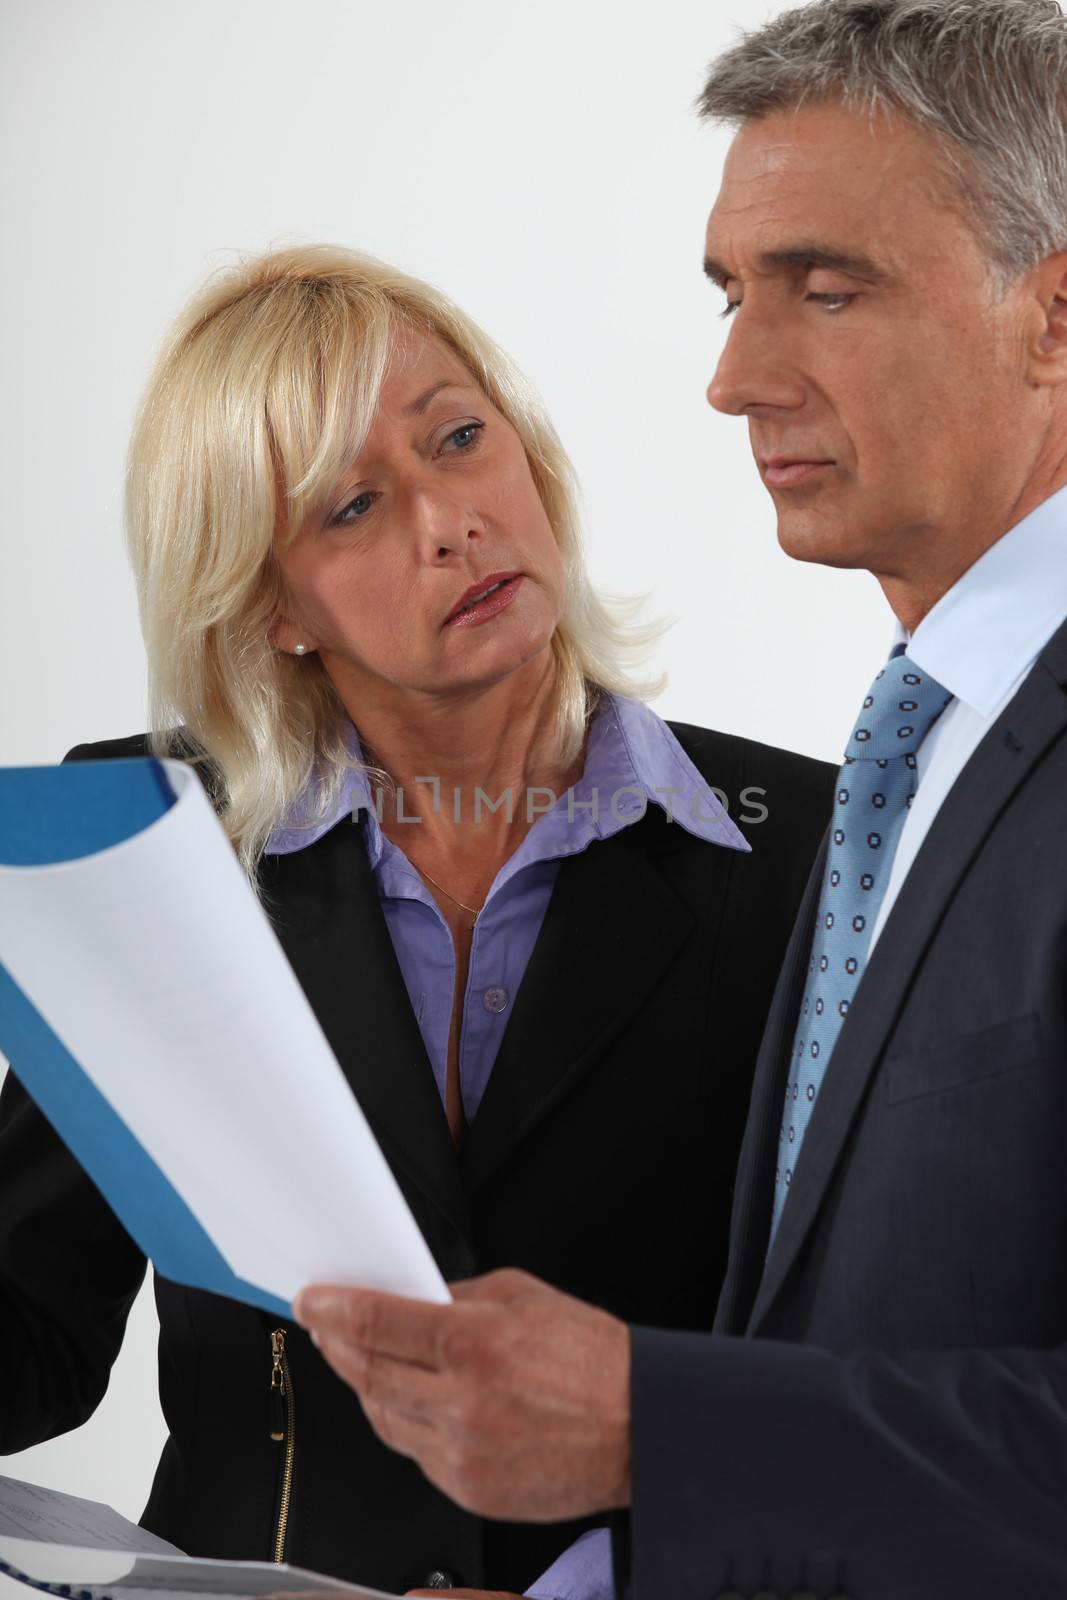 Senior business couple going over important document